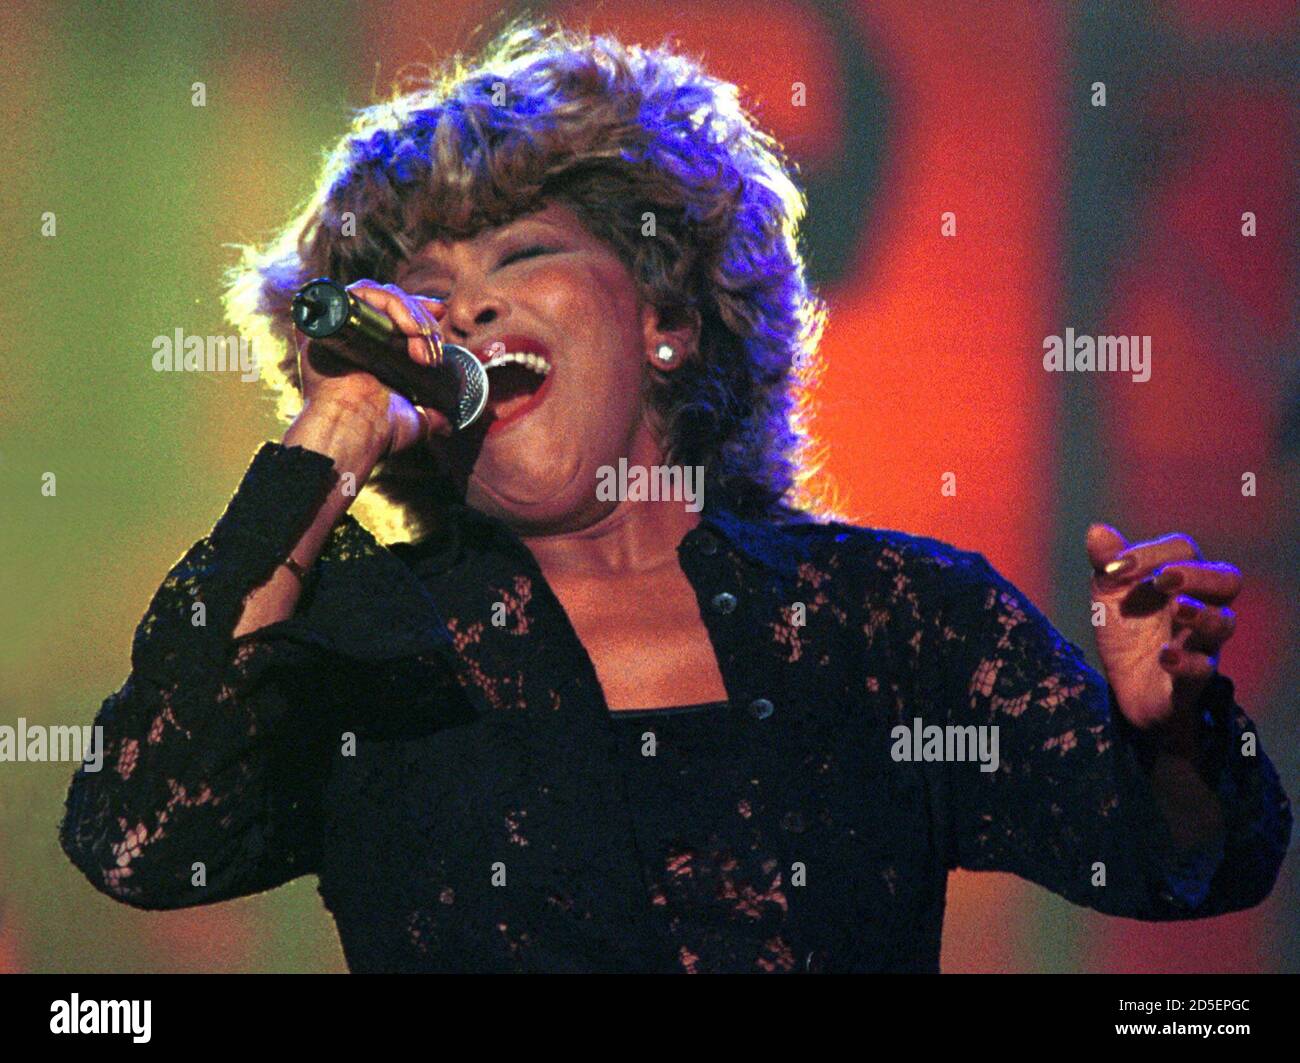 U.S. pop singer Tina Turner performs a song during the German record awards  "Echo" in Hamburg March 9. The German Phono-Akademie awarded German and  international pop singers and bands in 25 categories